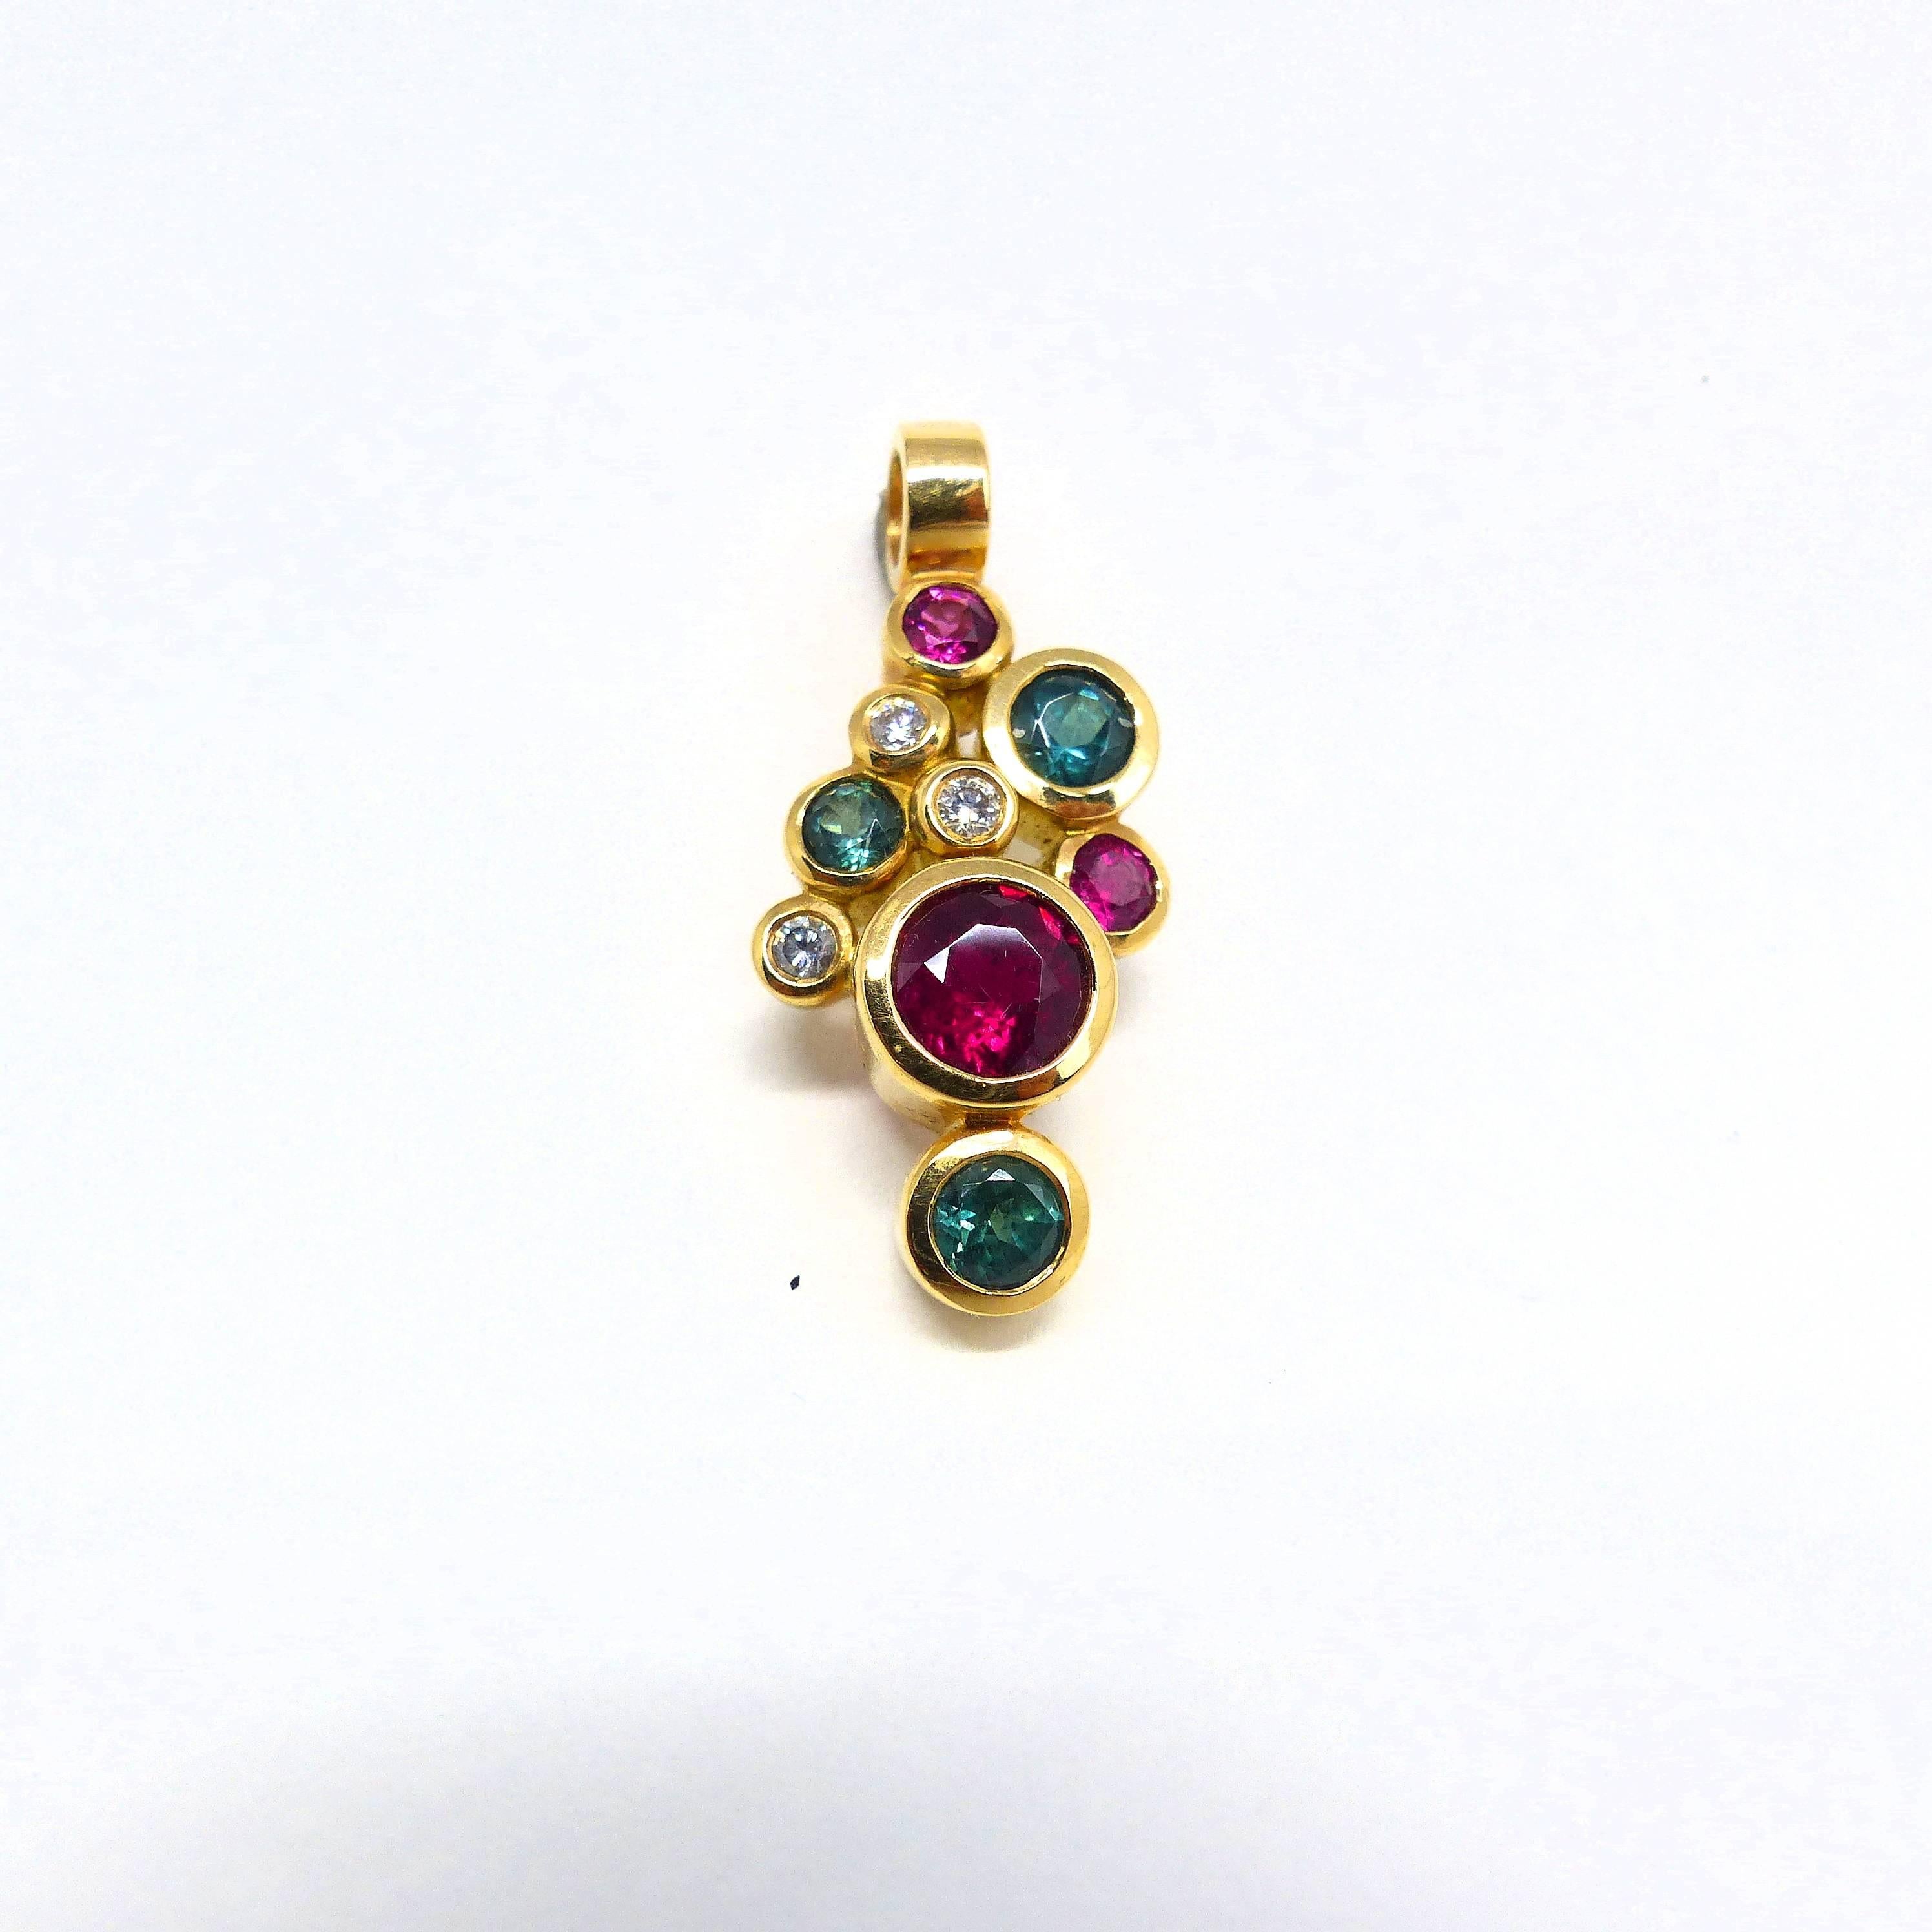 Thomas Leyser is renowned for his contemporary jewellery designs utilizing fine coloured gemstones and diamonds. 

This pendant in 18k rose gold is set with 6 fine vivid round Tourmalines, Rubelites facetted round 3-6mm, 1,75cts. and 3 diamonds,